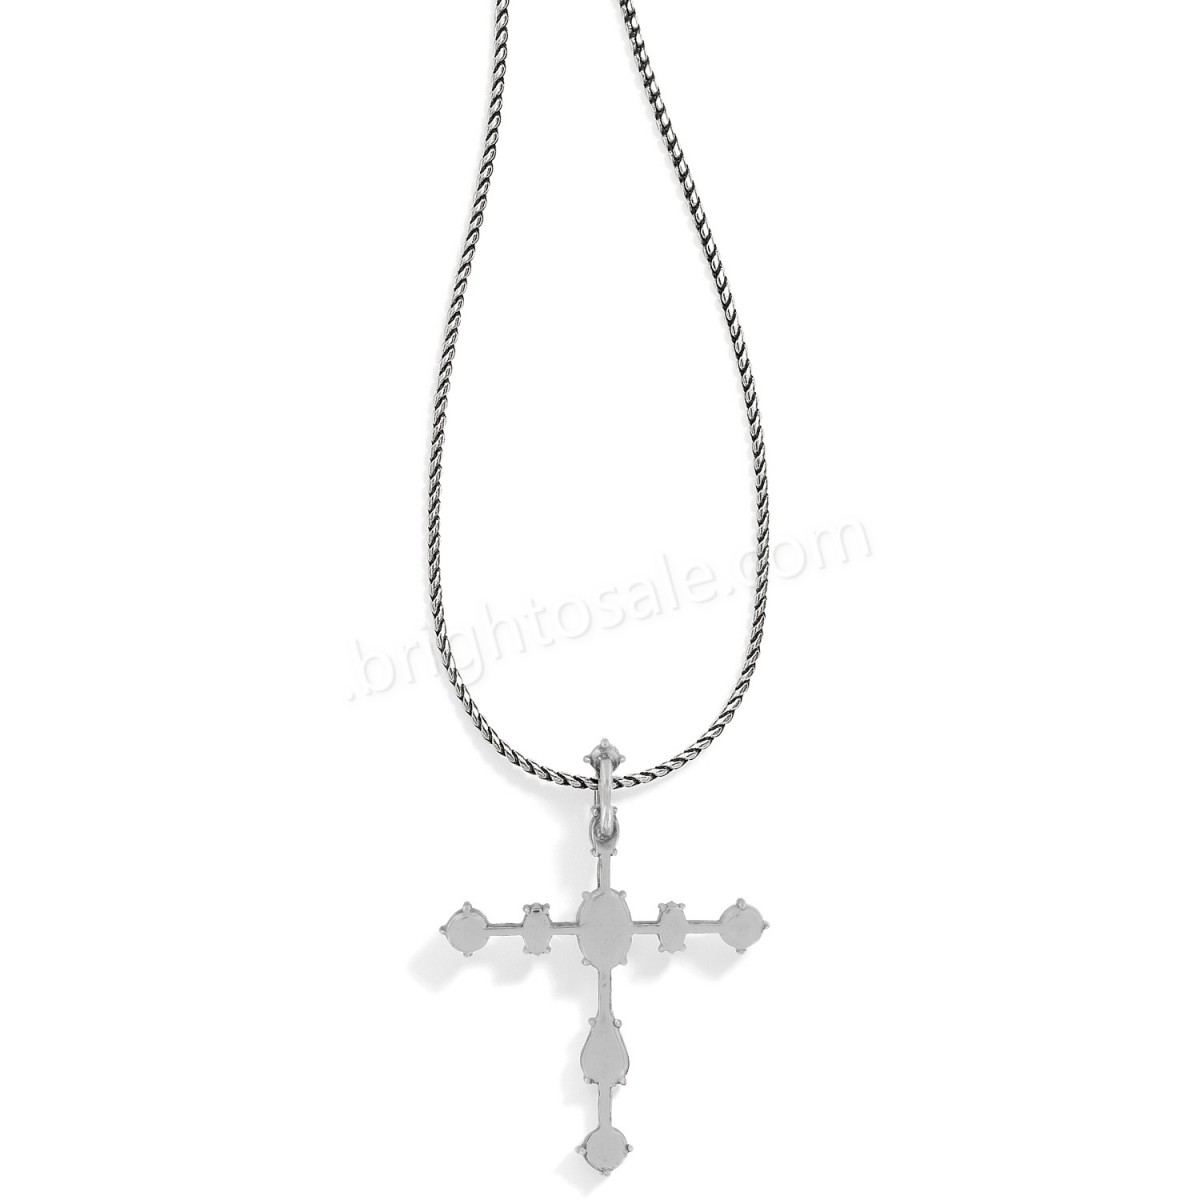 Brighton Collectibles & Online Discount One Love Cross Necklace - -1